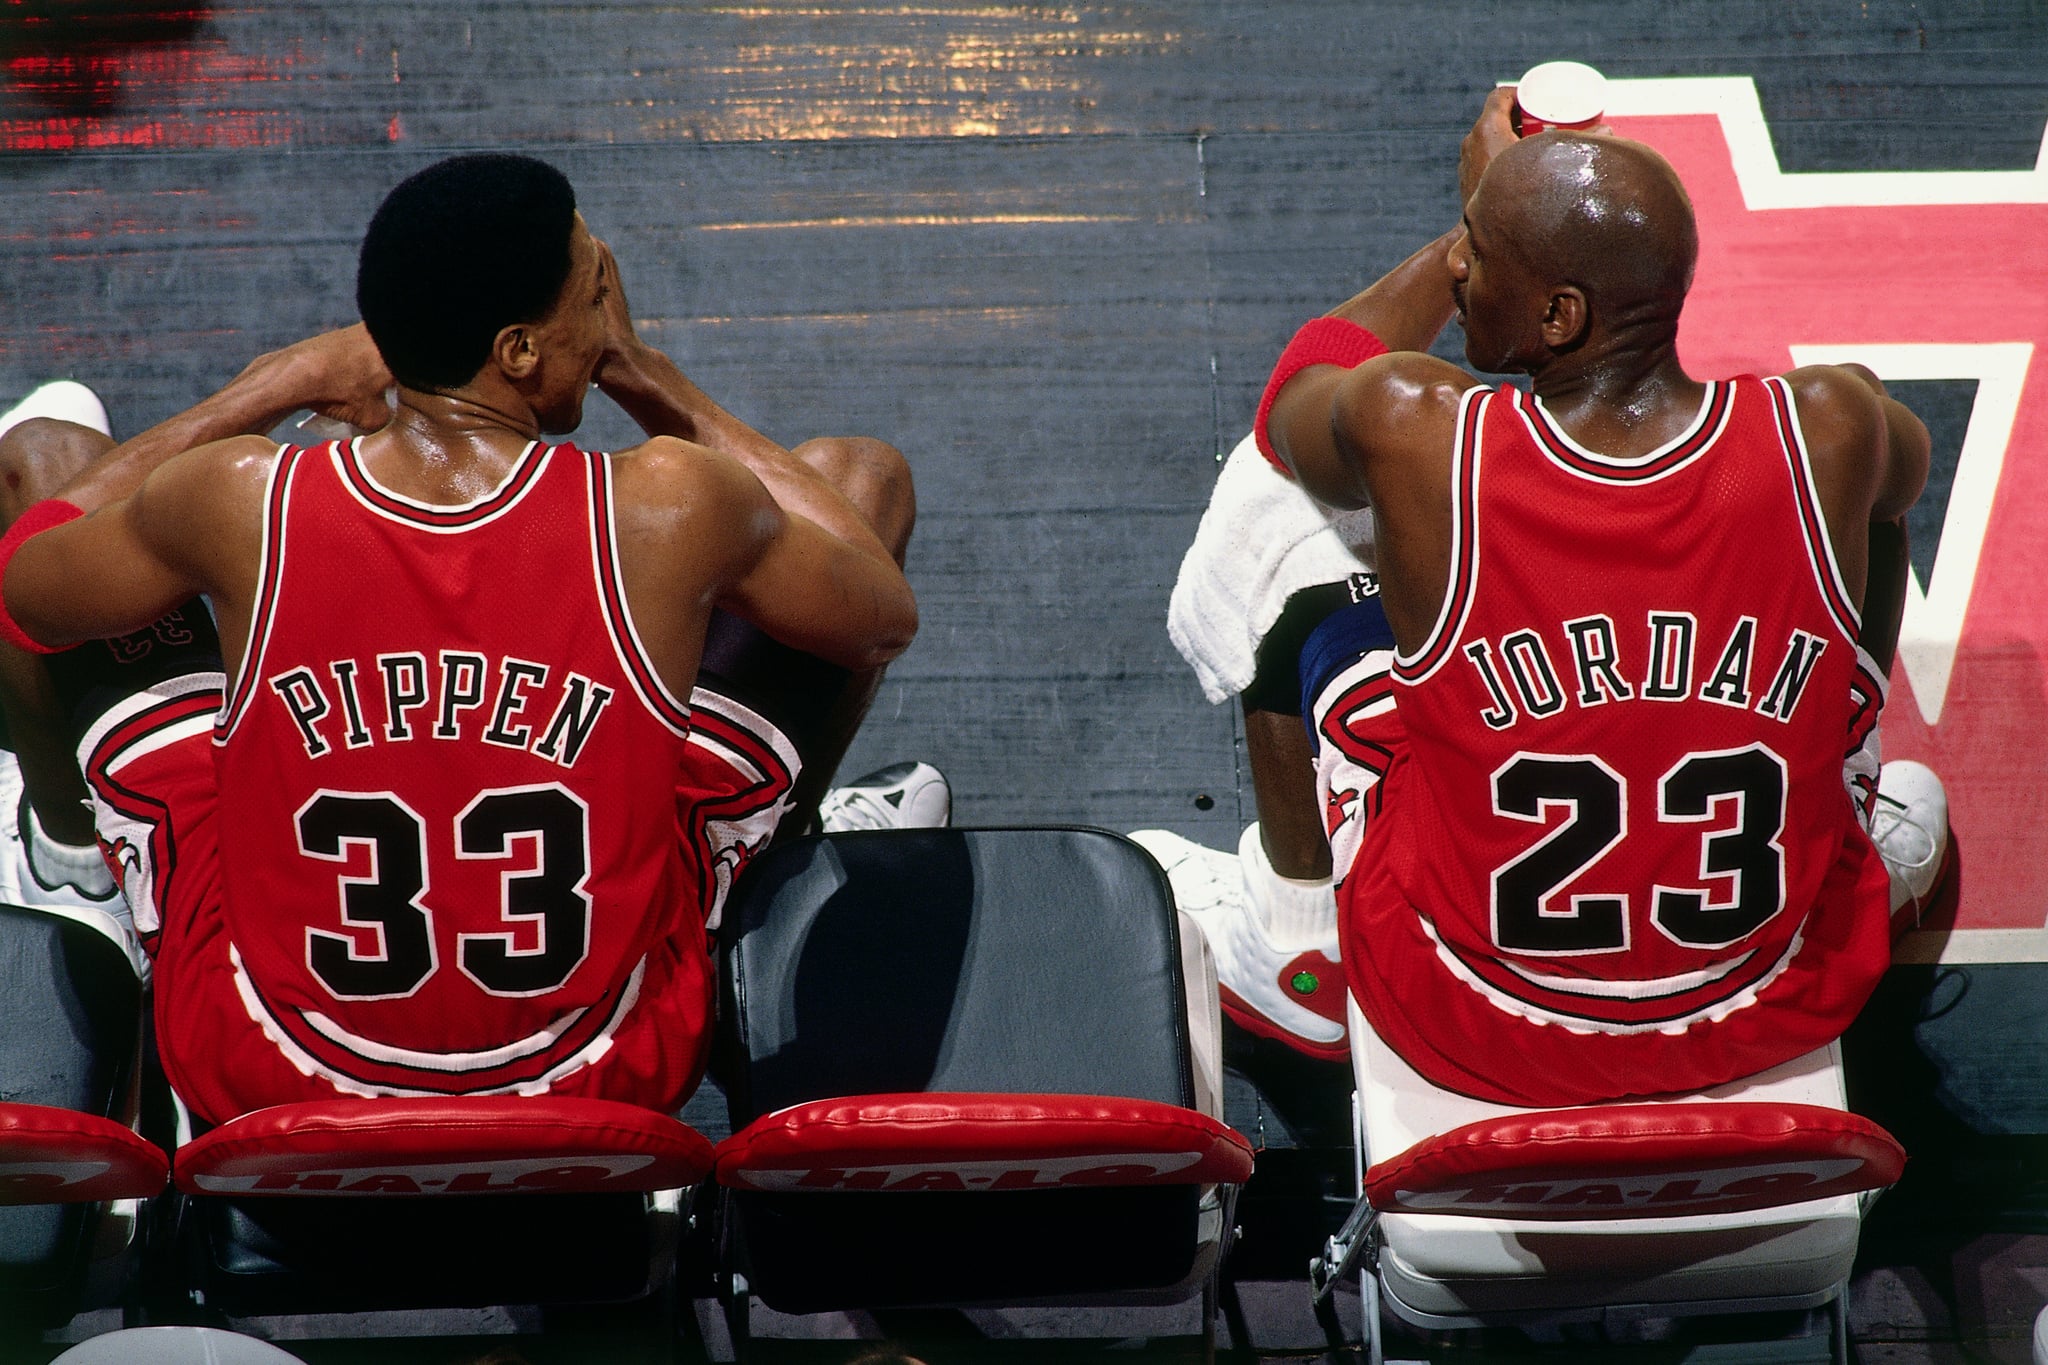 VANCOUVER, BC - JANUARY 27:  Scottie Pippen #33 and Michael Jordan #23 of the Chicago Bulls sit on the bench during the game against the Vancouver Grizzlies at General Motors Place on January 27, 1998 in Vancouver, British Columbia, Canada. NOTE TO USER: User expressly acknowledges and agrees that, by downloading and or using this photograph, User is consenting to the terms and conditions of the Getty Images Licence Agreement. Mandatory Copyright Notice: Copyright 1998 NBAE (Photo by Andy Hayt/NBAE via Getty Images)